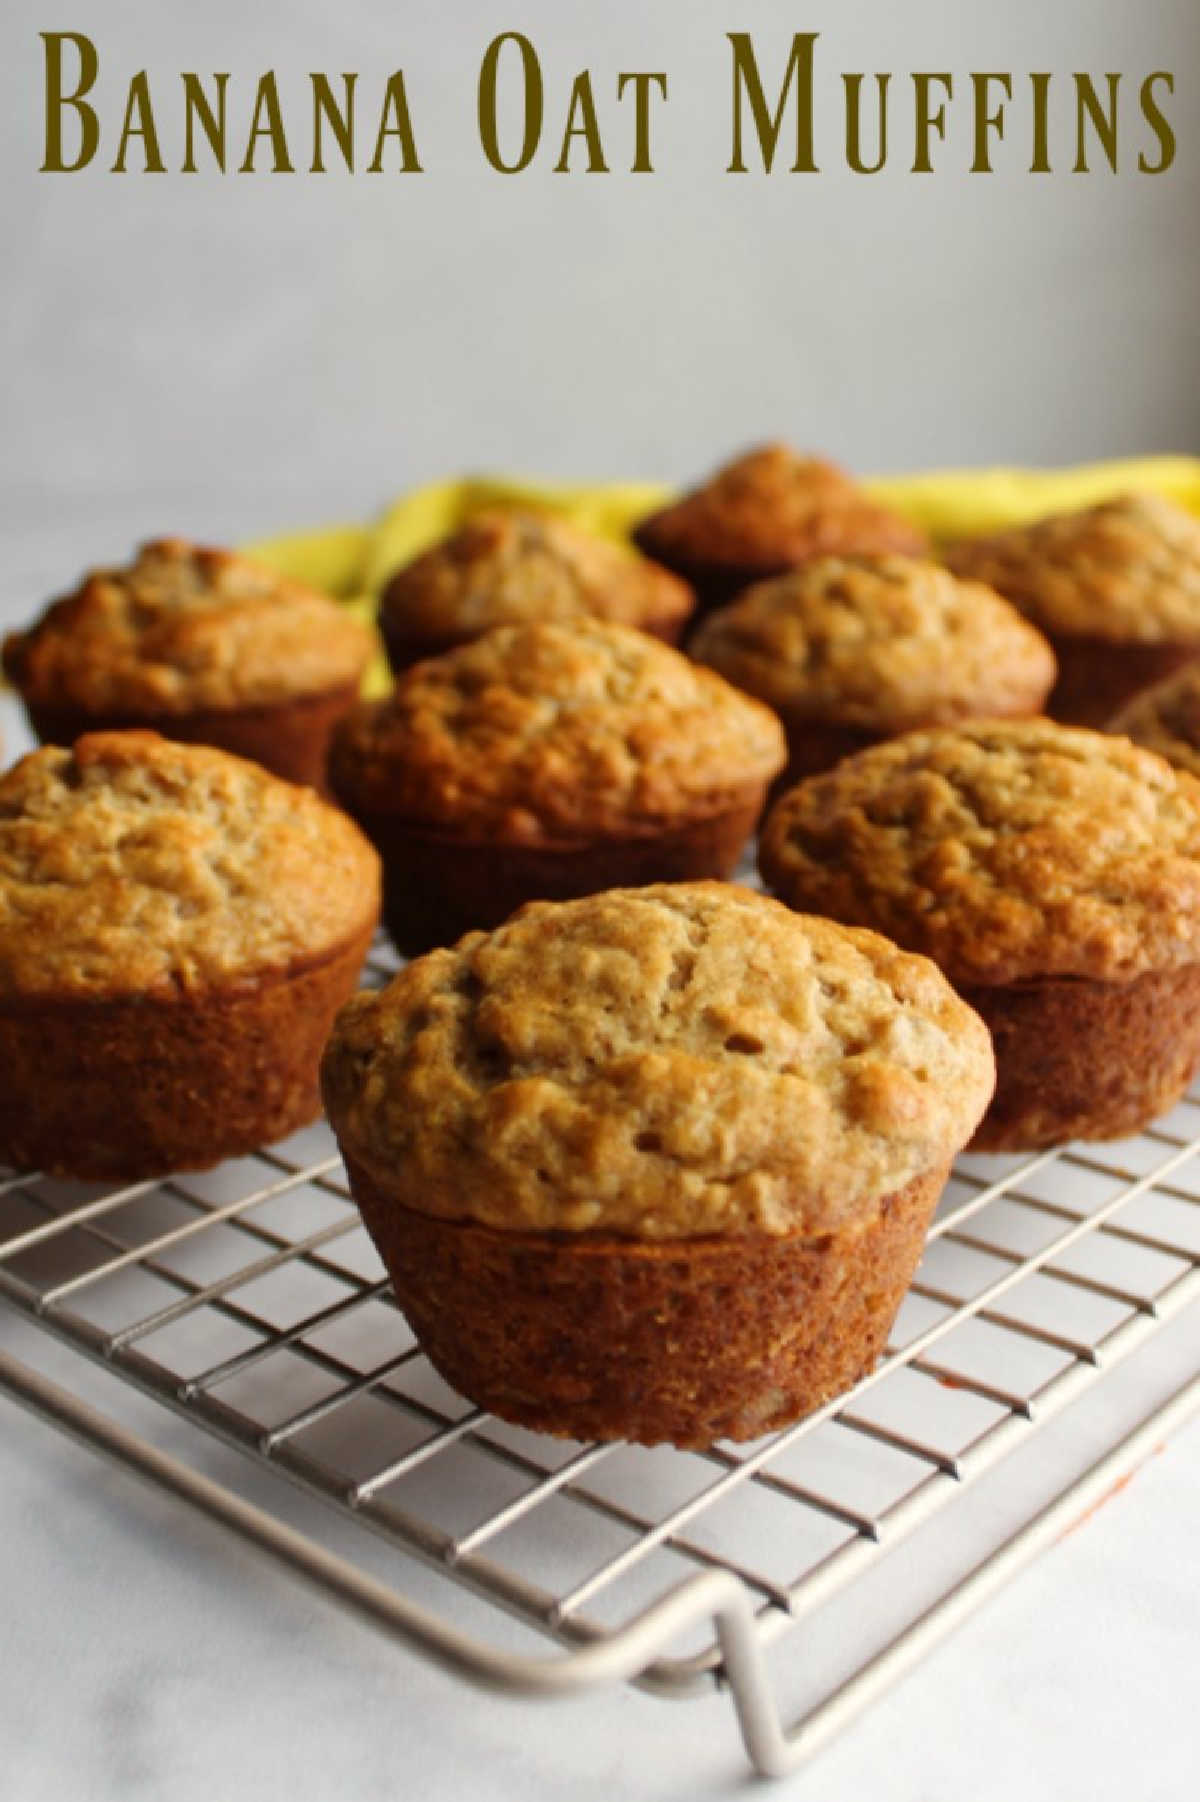 Whether you are looking for a grab and go breakfast or something for a leisurely weekend brunch, these banana oat muffins are perfect!